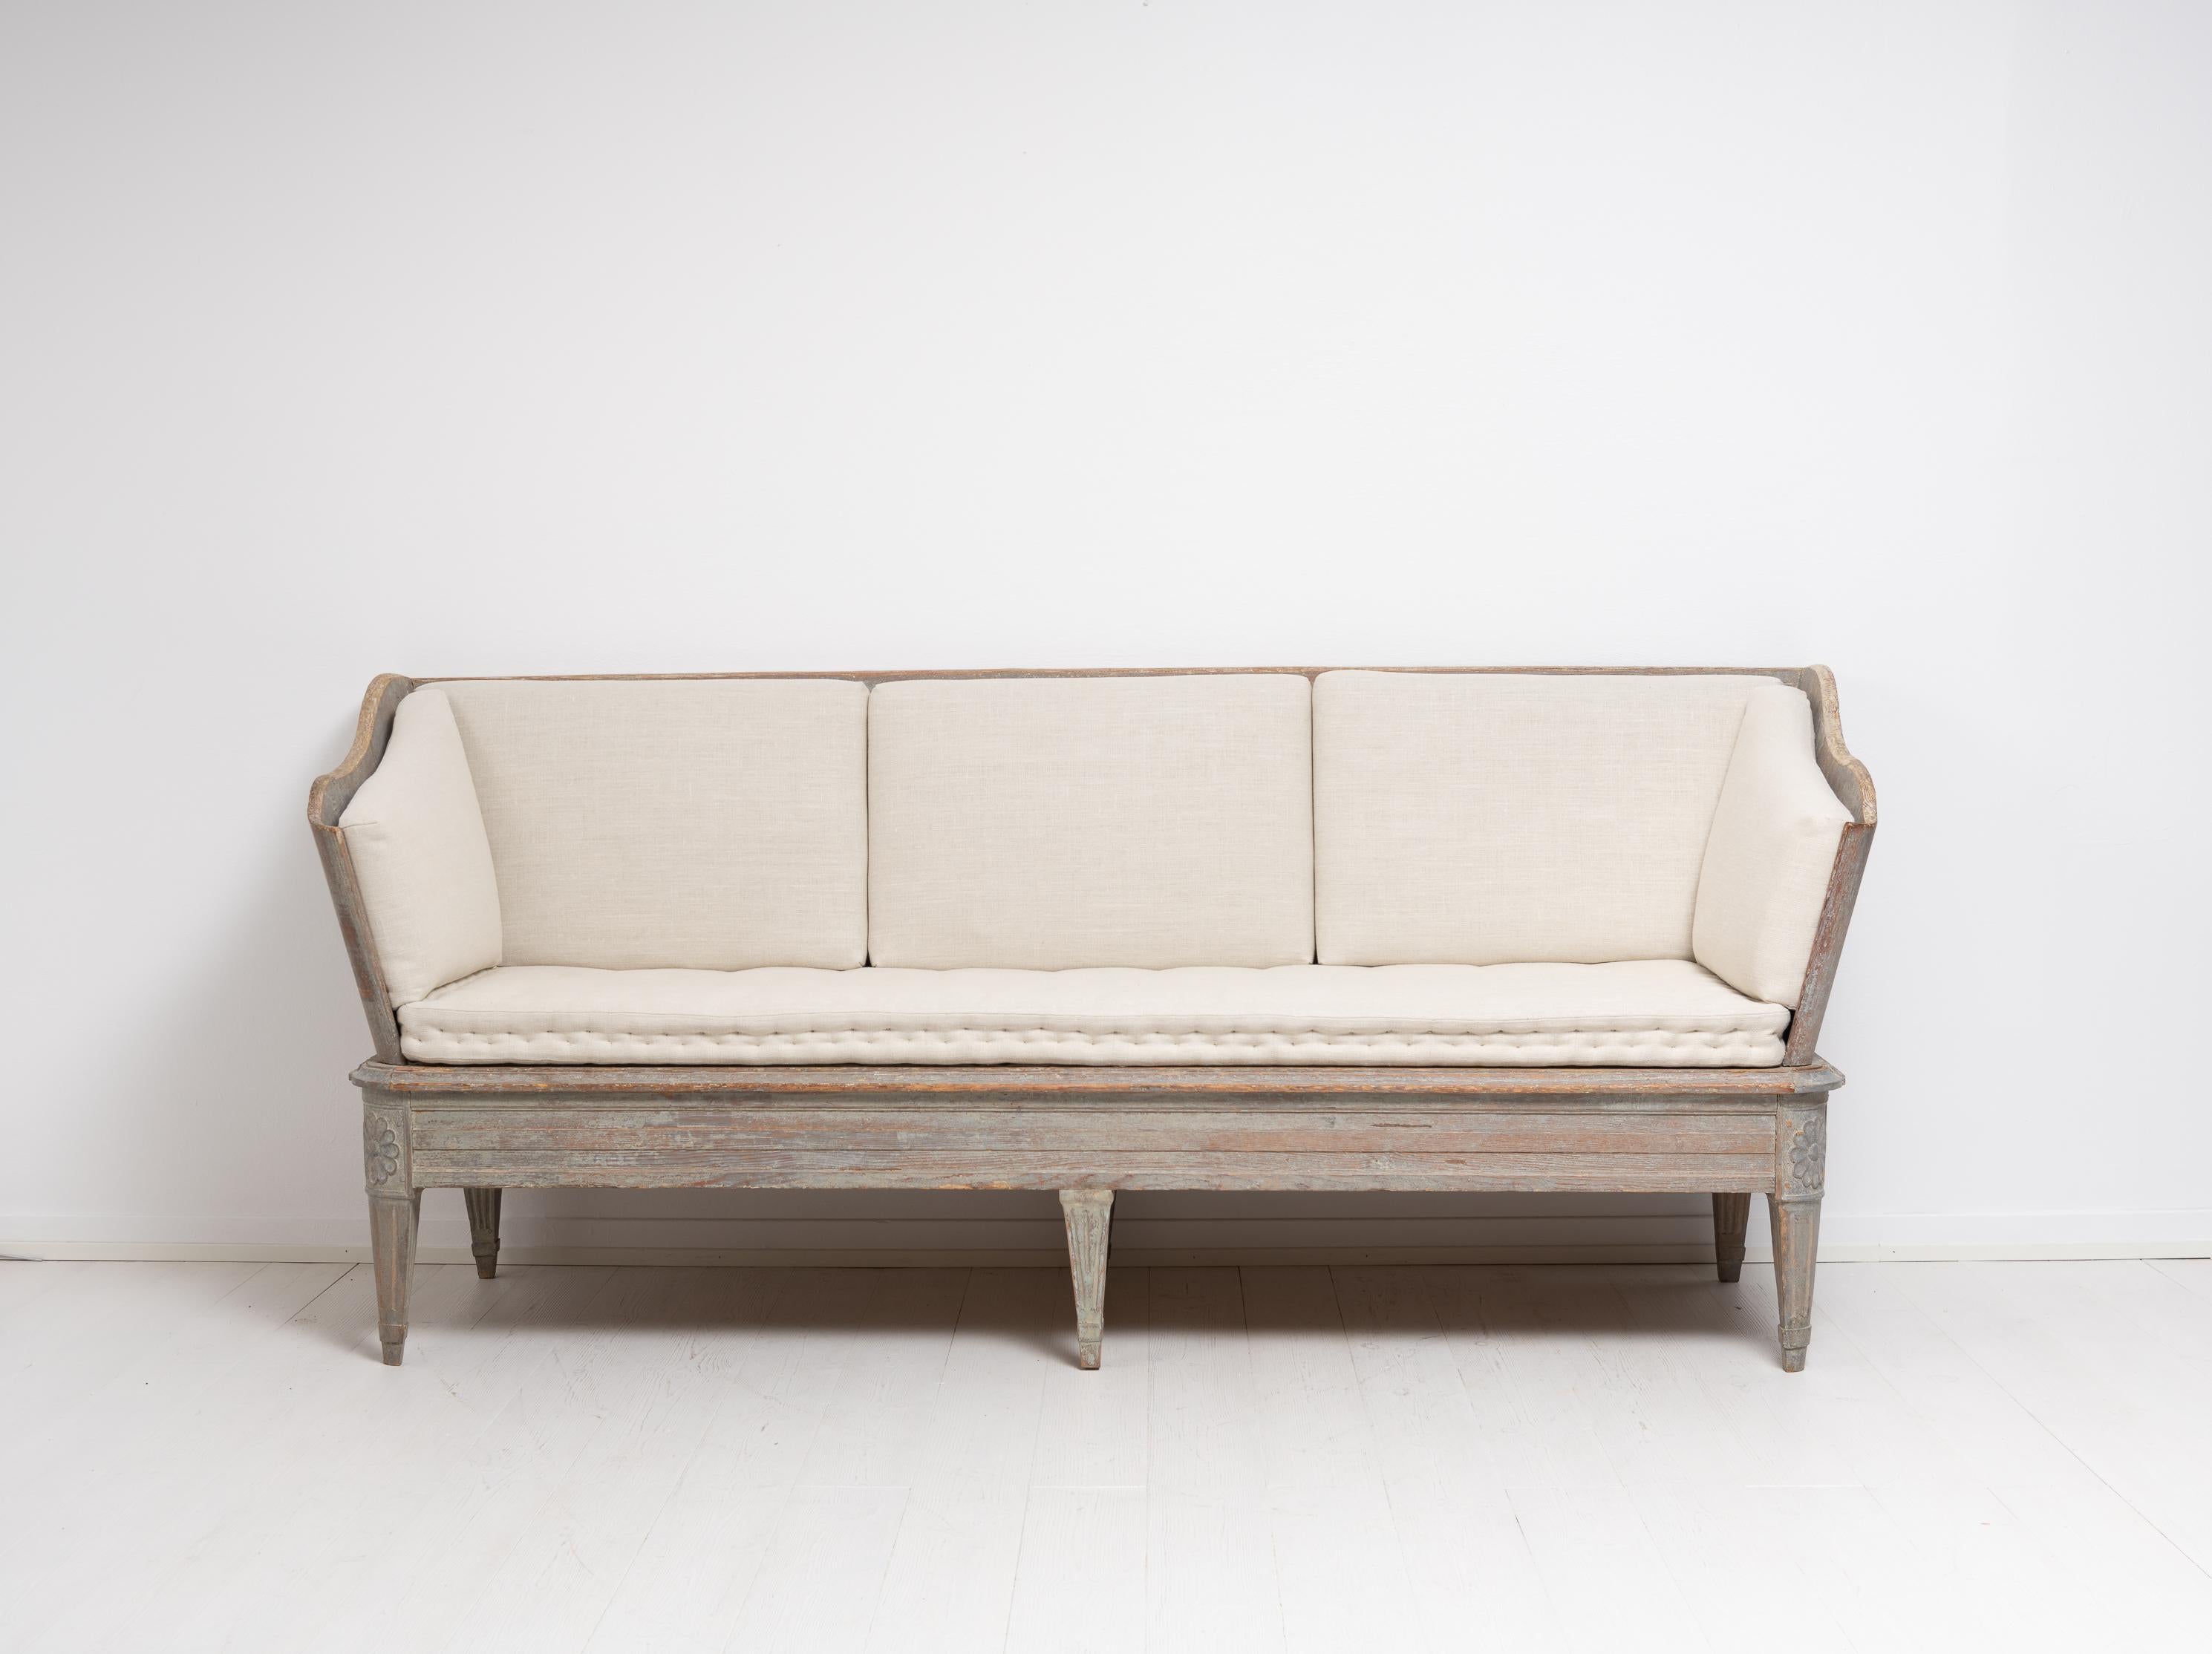 Elegant 18th century gustavian sofa from Sweden. The sofa is from the late 1700s and made in painted pine. The Swedish name for this model sofa is “trågsoffa” and this particular one is dry scraped by hand down to the original paint. The sofa is